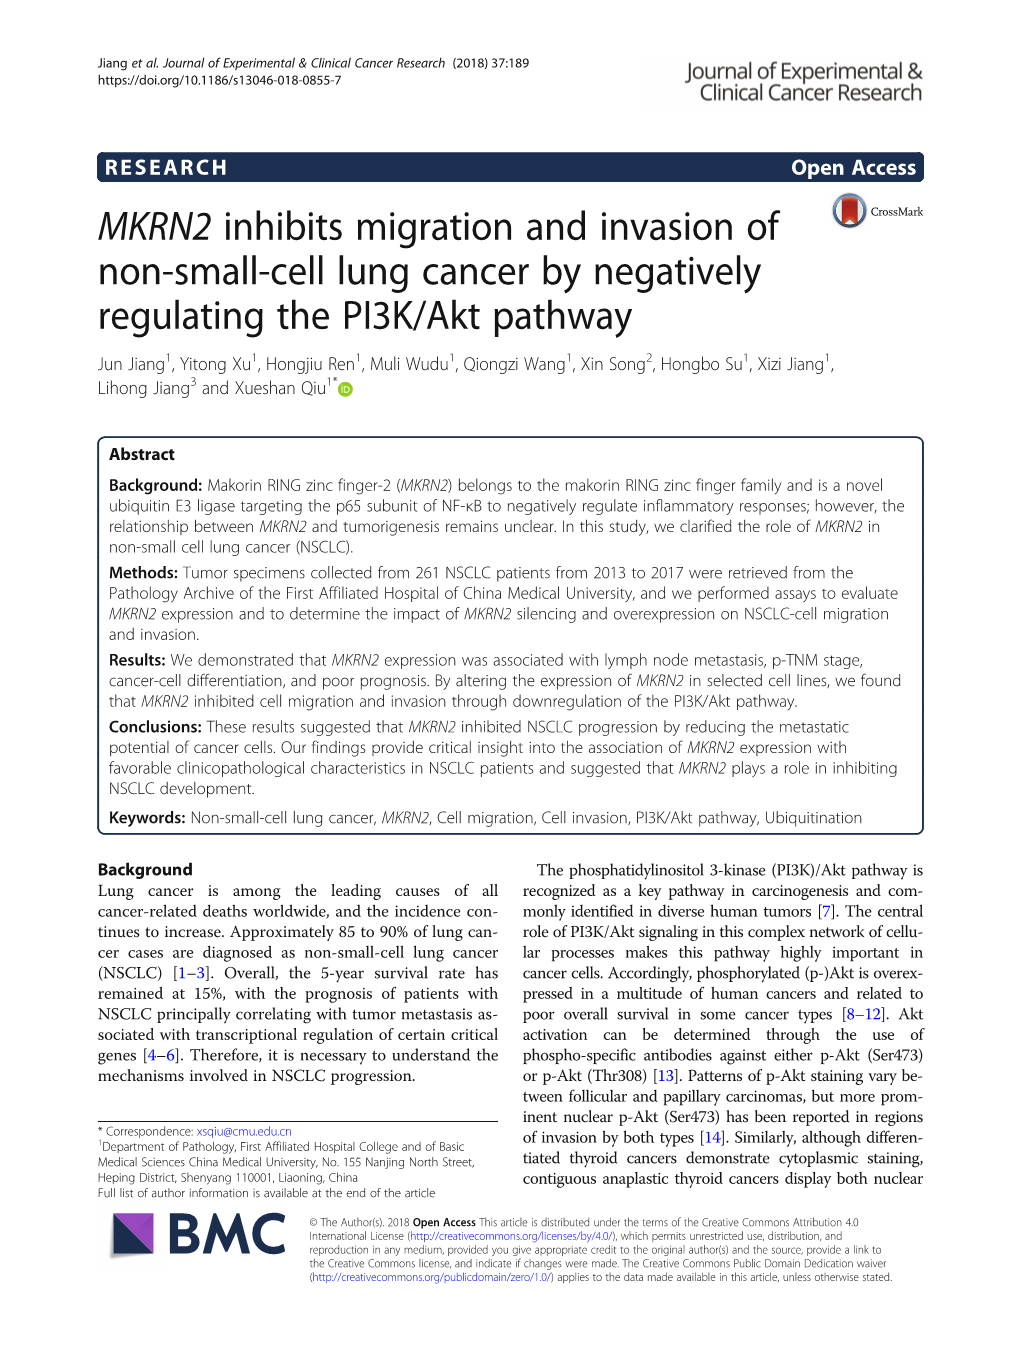 MKRN2 Inhibits Migration and Invasion of Non-Small-Cell Lung